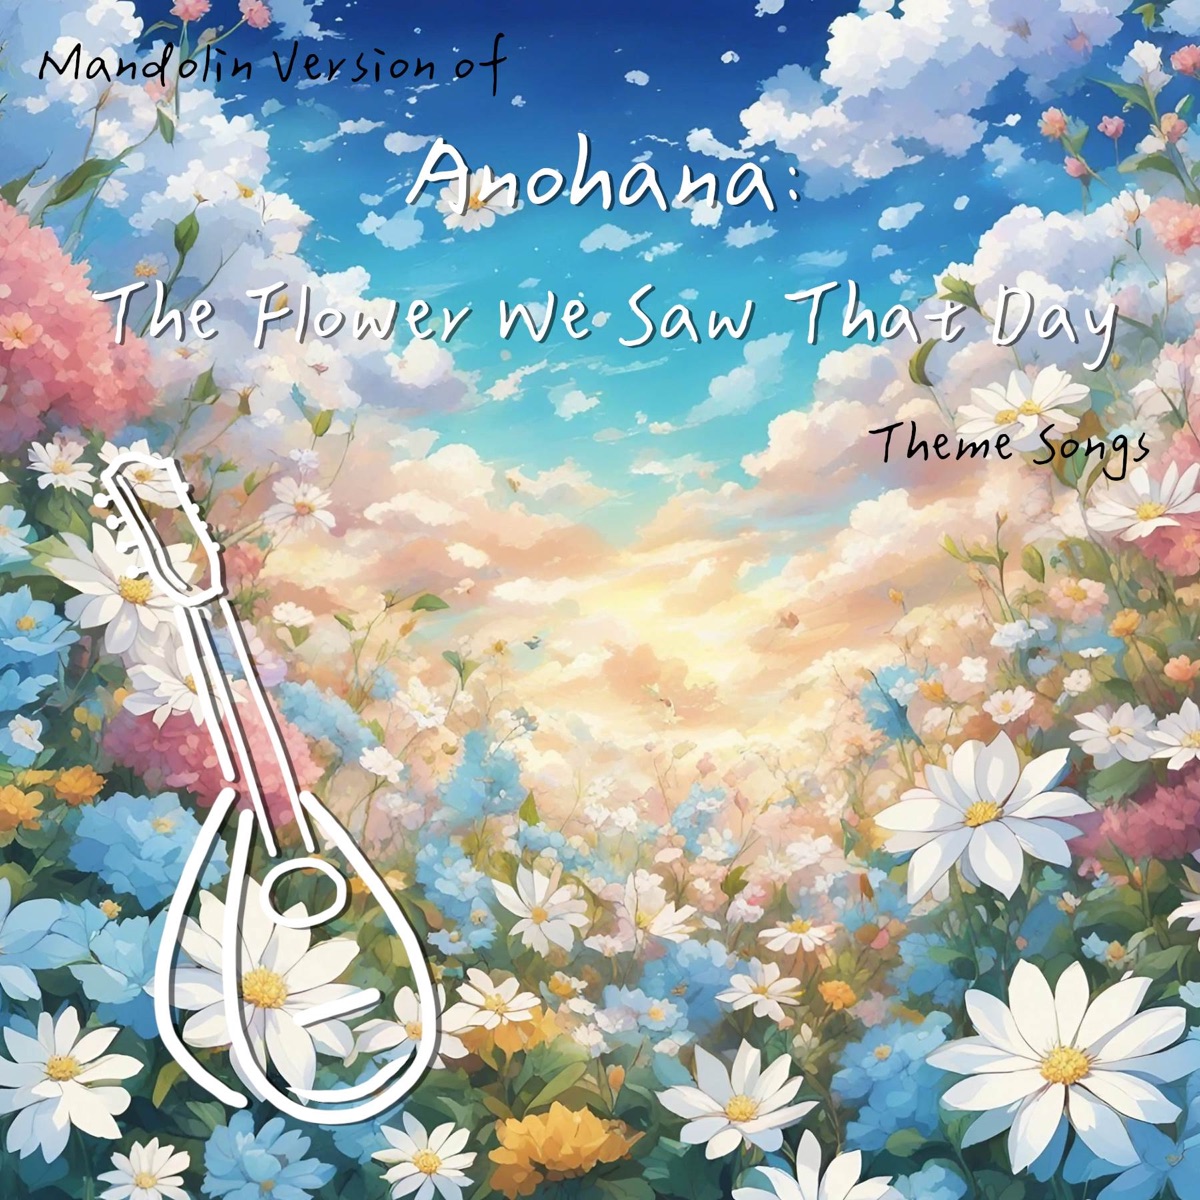 ‎Hikaru Nara - Mandolin & Piano Ver (From Your Lie in April) – Song by  BloggerMandolin – Apple Music